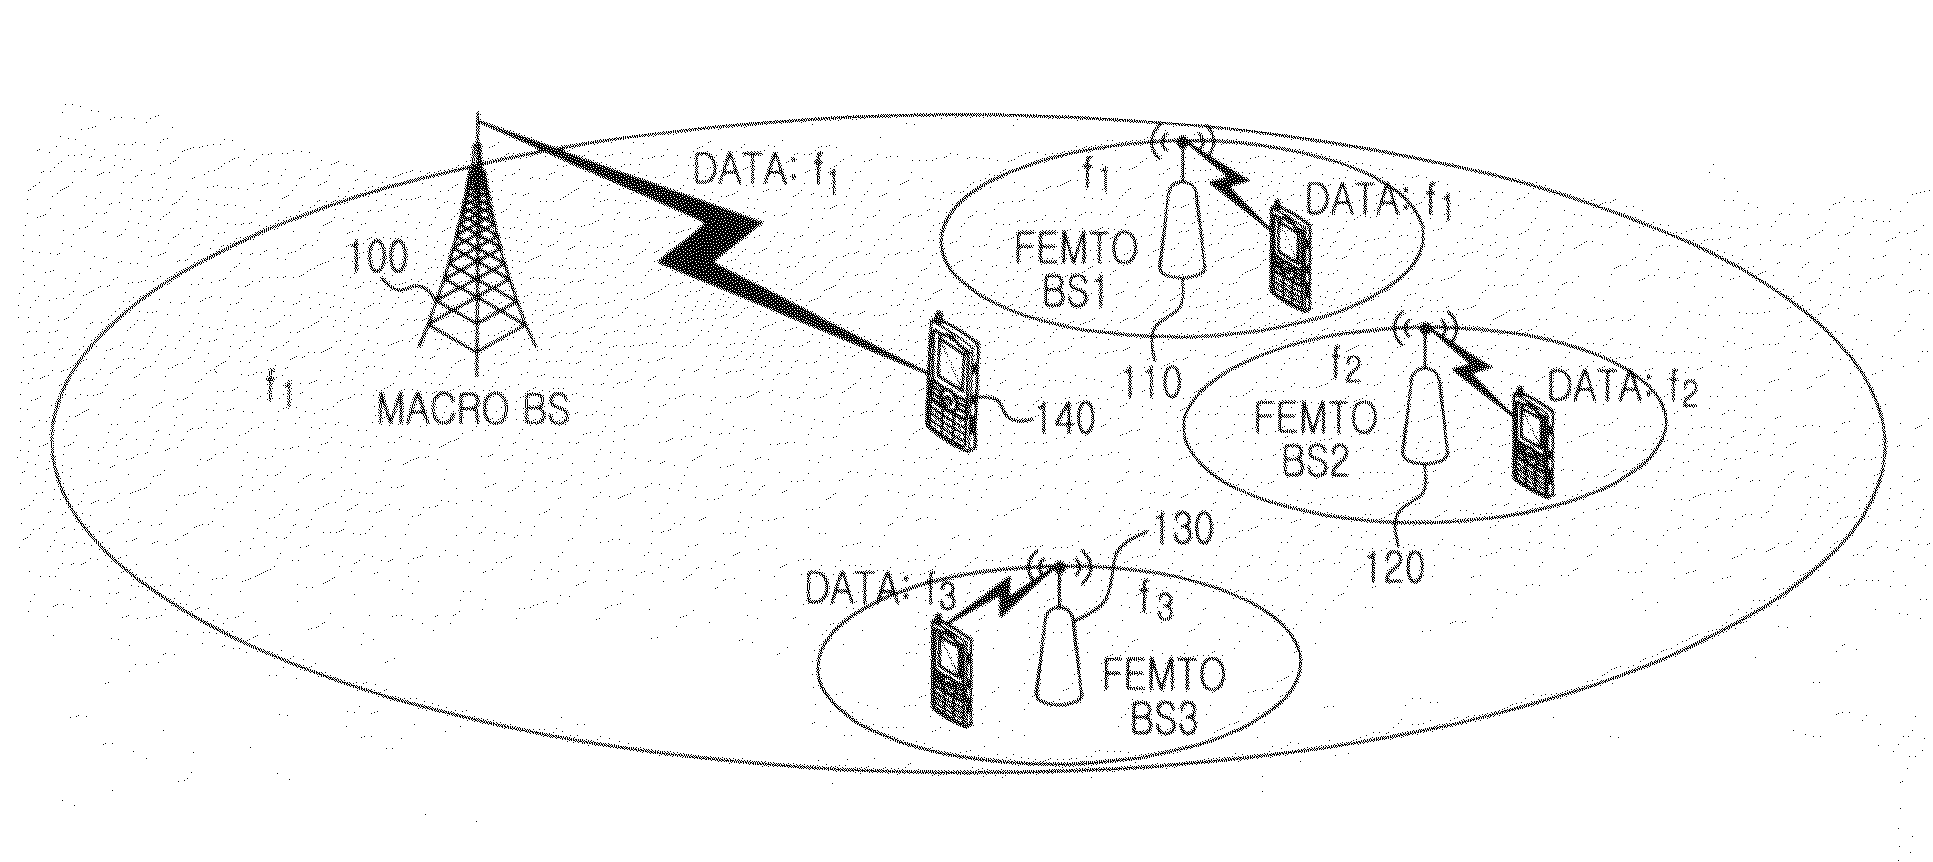 Appatatus and method for transmitting inter-working signal in wireless communication system